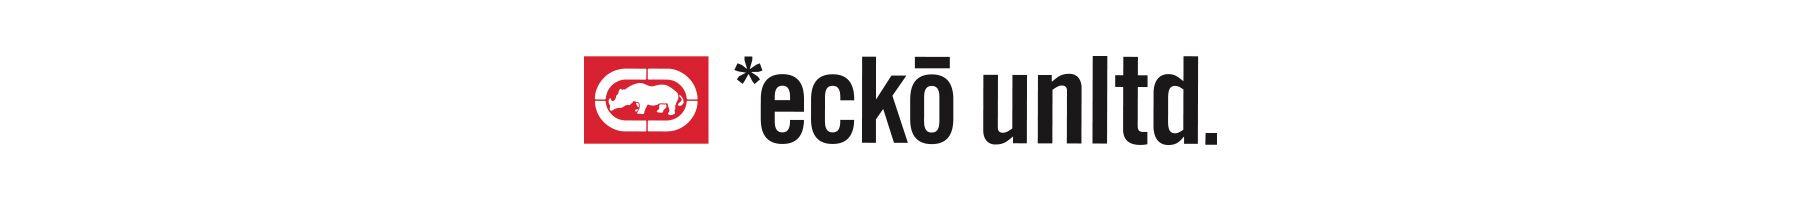 Ecko Clothing Logo - Shop & Find Men's Ecko Outlet 60%+ Off Clothing And Fashion At ...